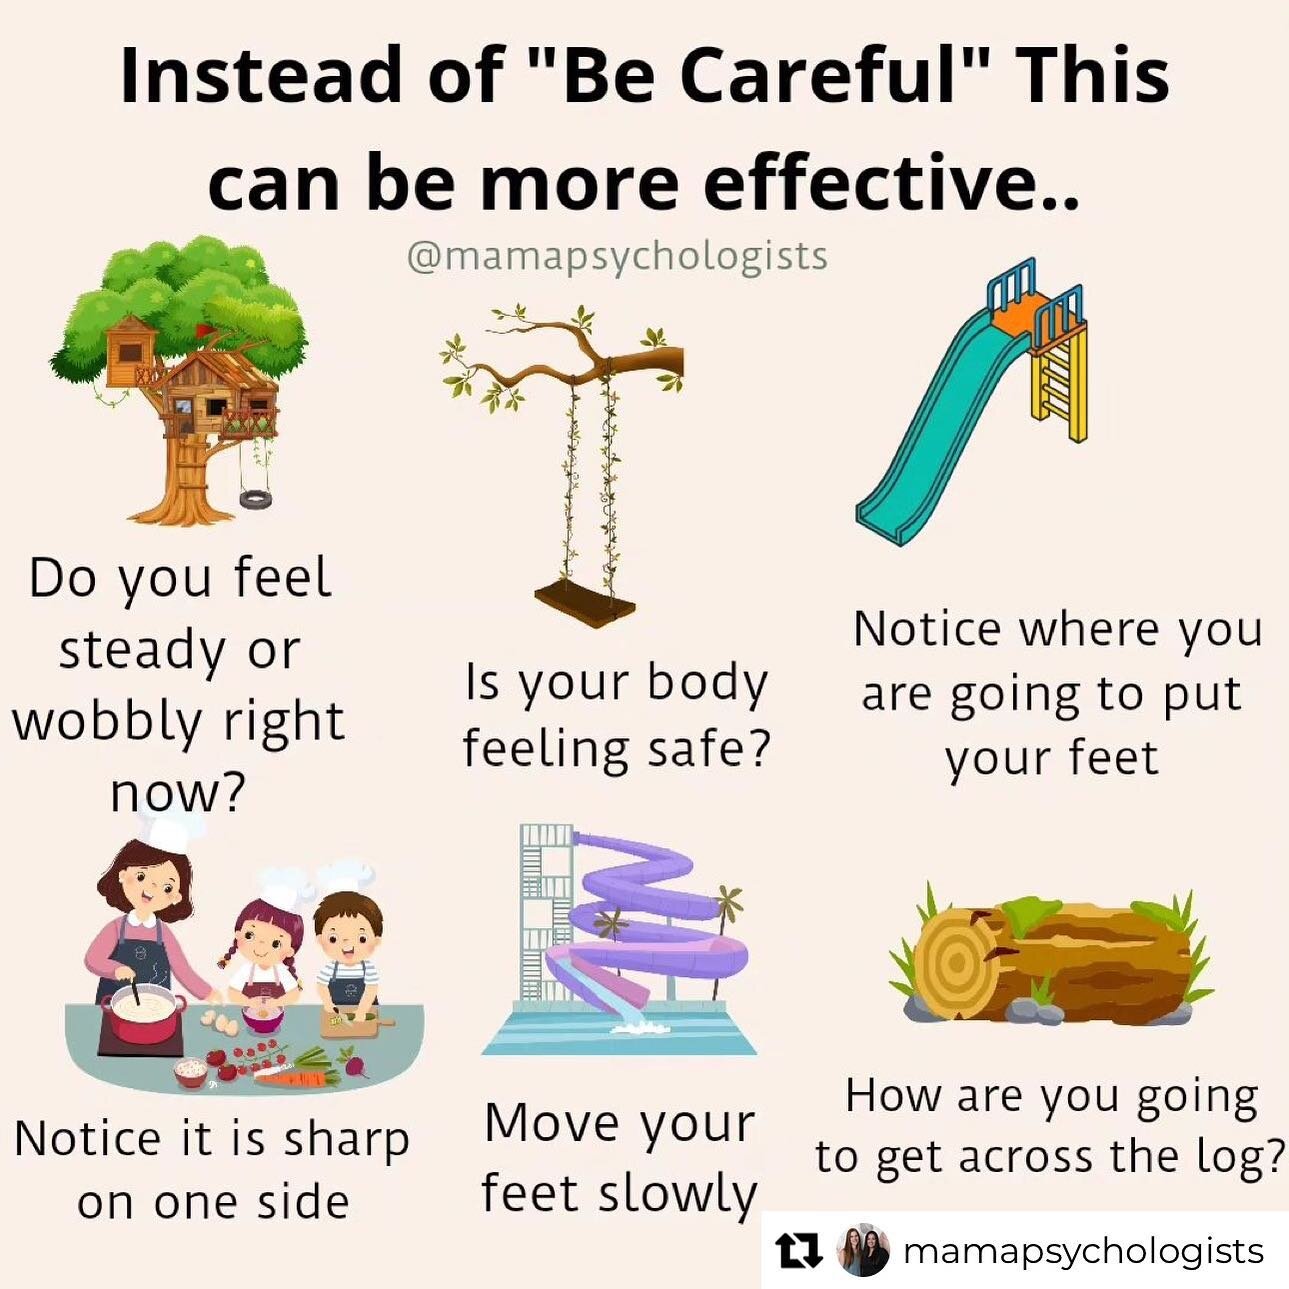 Repost from @mamapsychologists
&bull;
SAVE THIS! We were fishing yesterday and my daughter ran ahead on a swaying dock 😬. Induce mom panic as I didn't feel like going swimming that day. I yelled &quot;BE CAREFUL&quot; It was like I was talking to a 